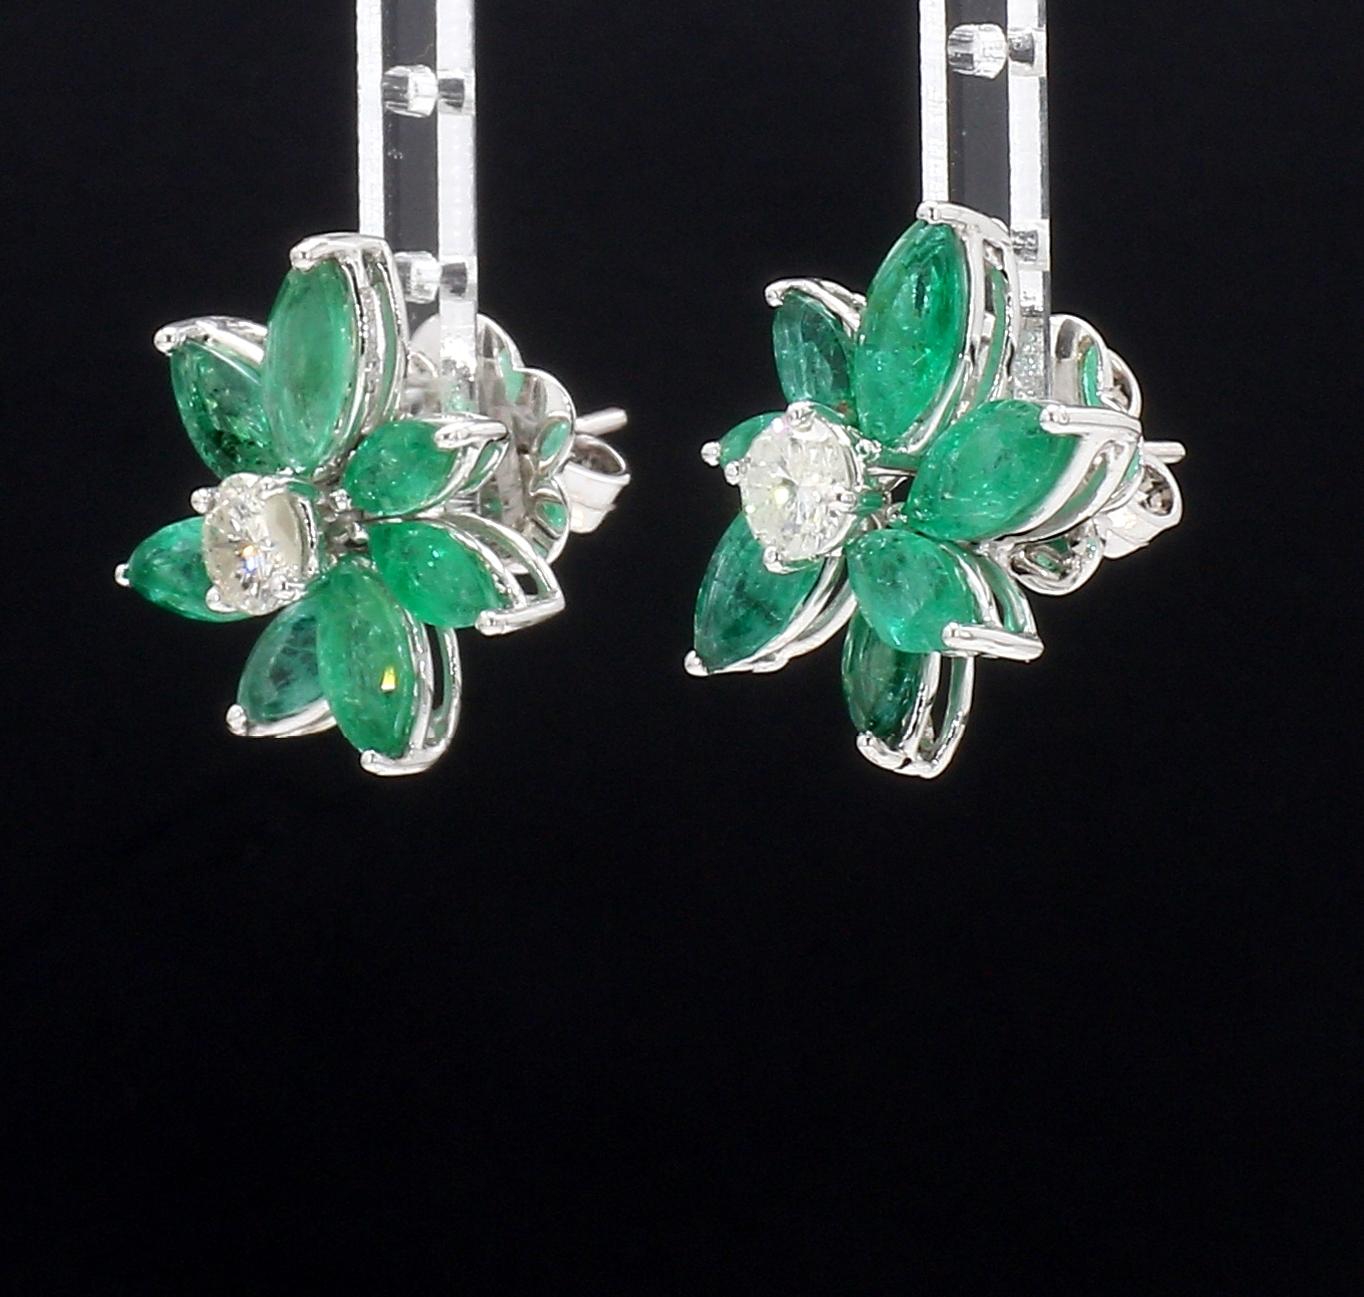 **All jewellery is one-of-a-kind, that means we have only 1 in stock**
**Hallmarked with diamond weight and gold purity**

Add a pop of color to your jewelry collection with these stunning Emerald and Diamond Stud Earrings from Alternative